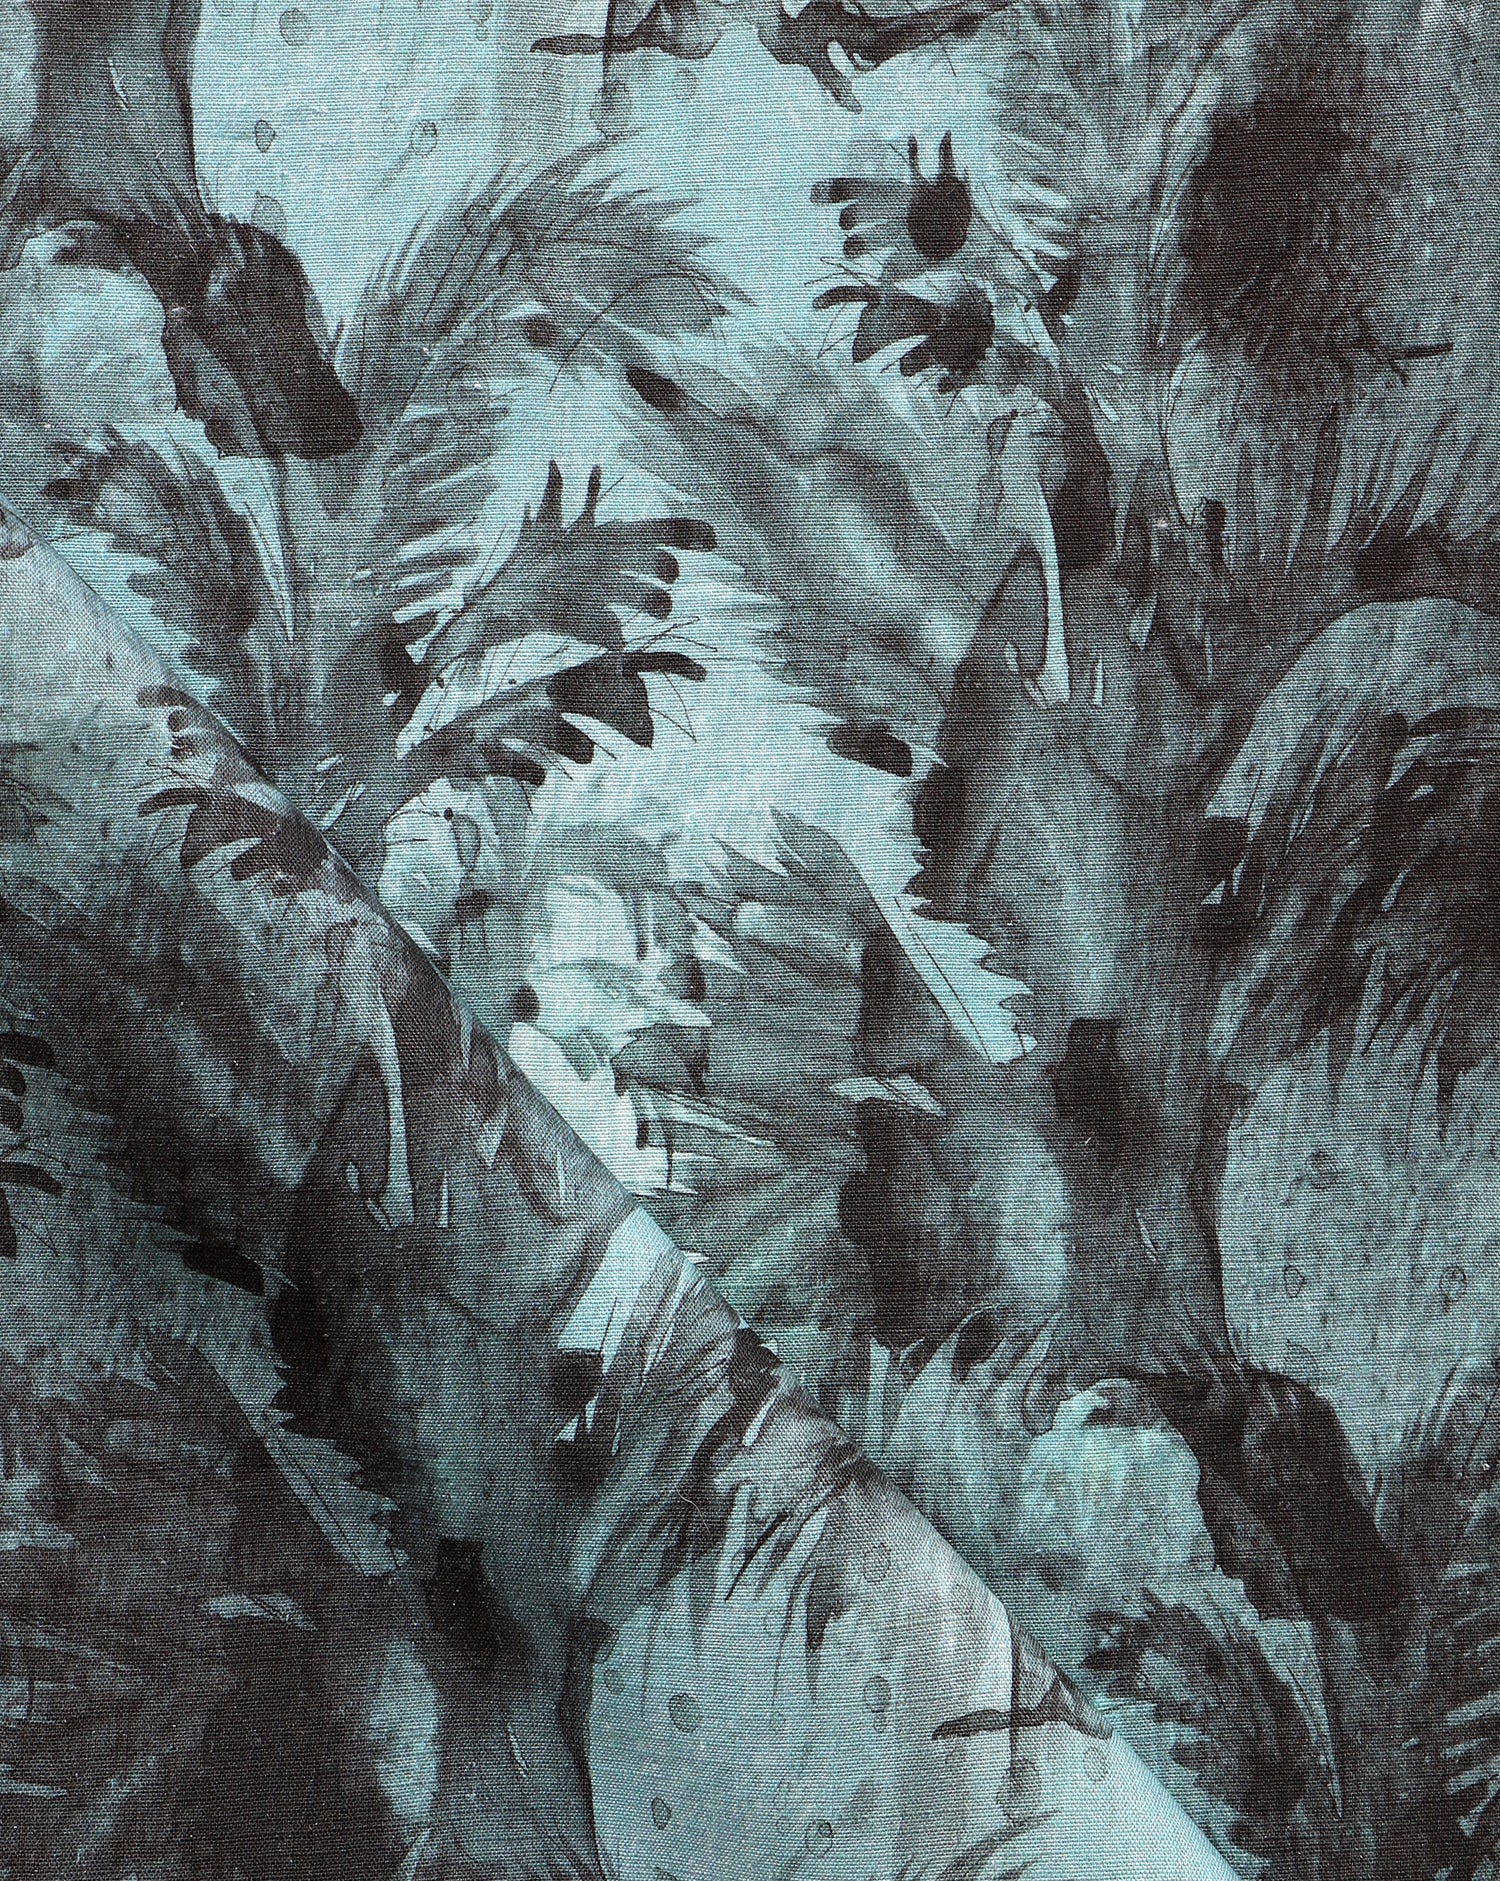 A blue and black fabric with a palm tree pattern on it